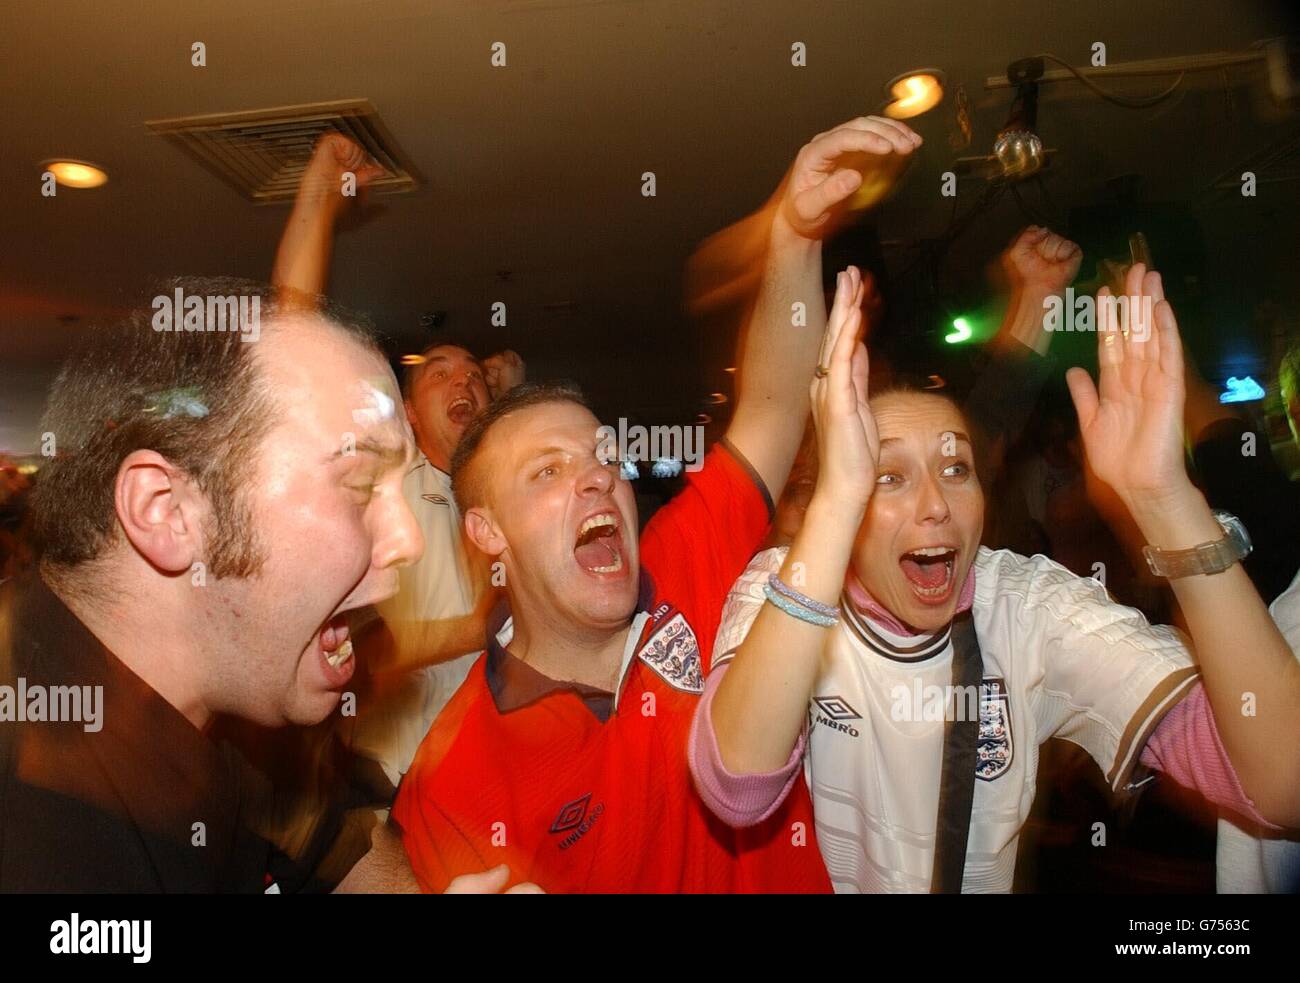 England fans celebrate the final result of 2-2 against Greece, meaning automatic qualification for England in to the 2002 World Cup Finals, at The Sports Cafe, Haymarket, London. eg Stock Photo